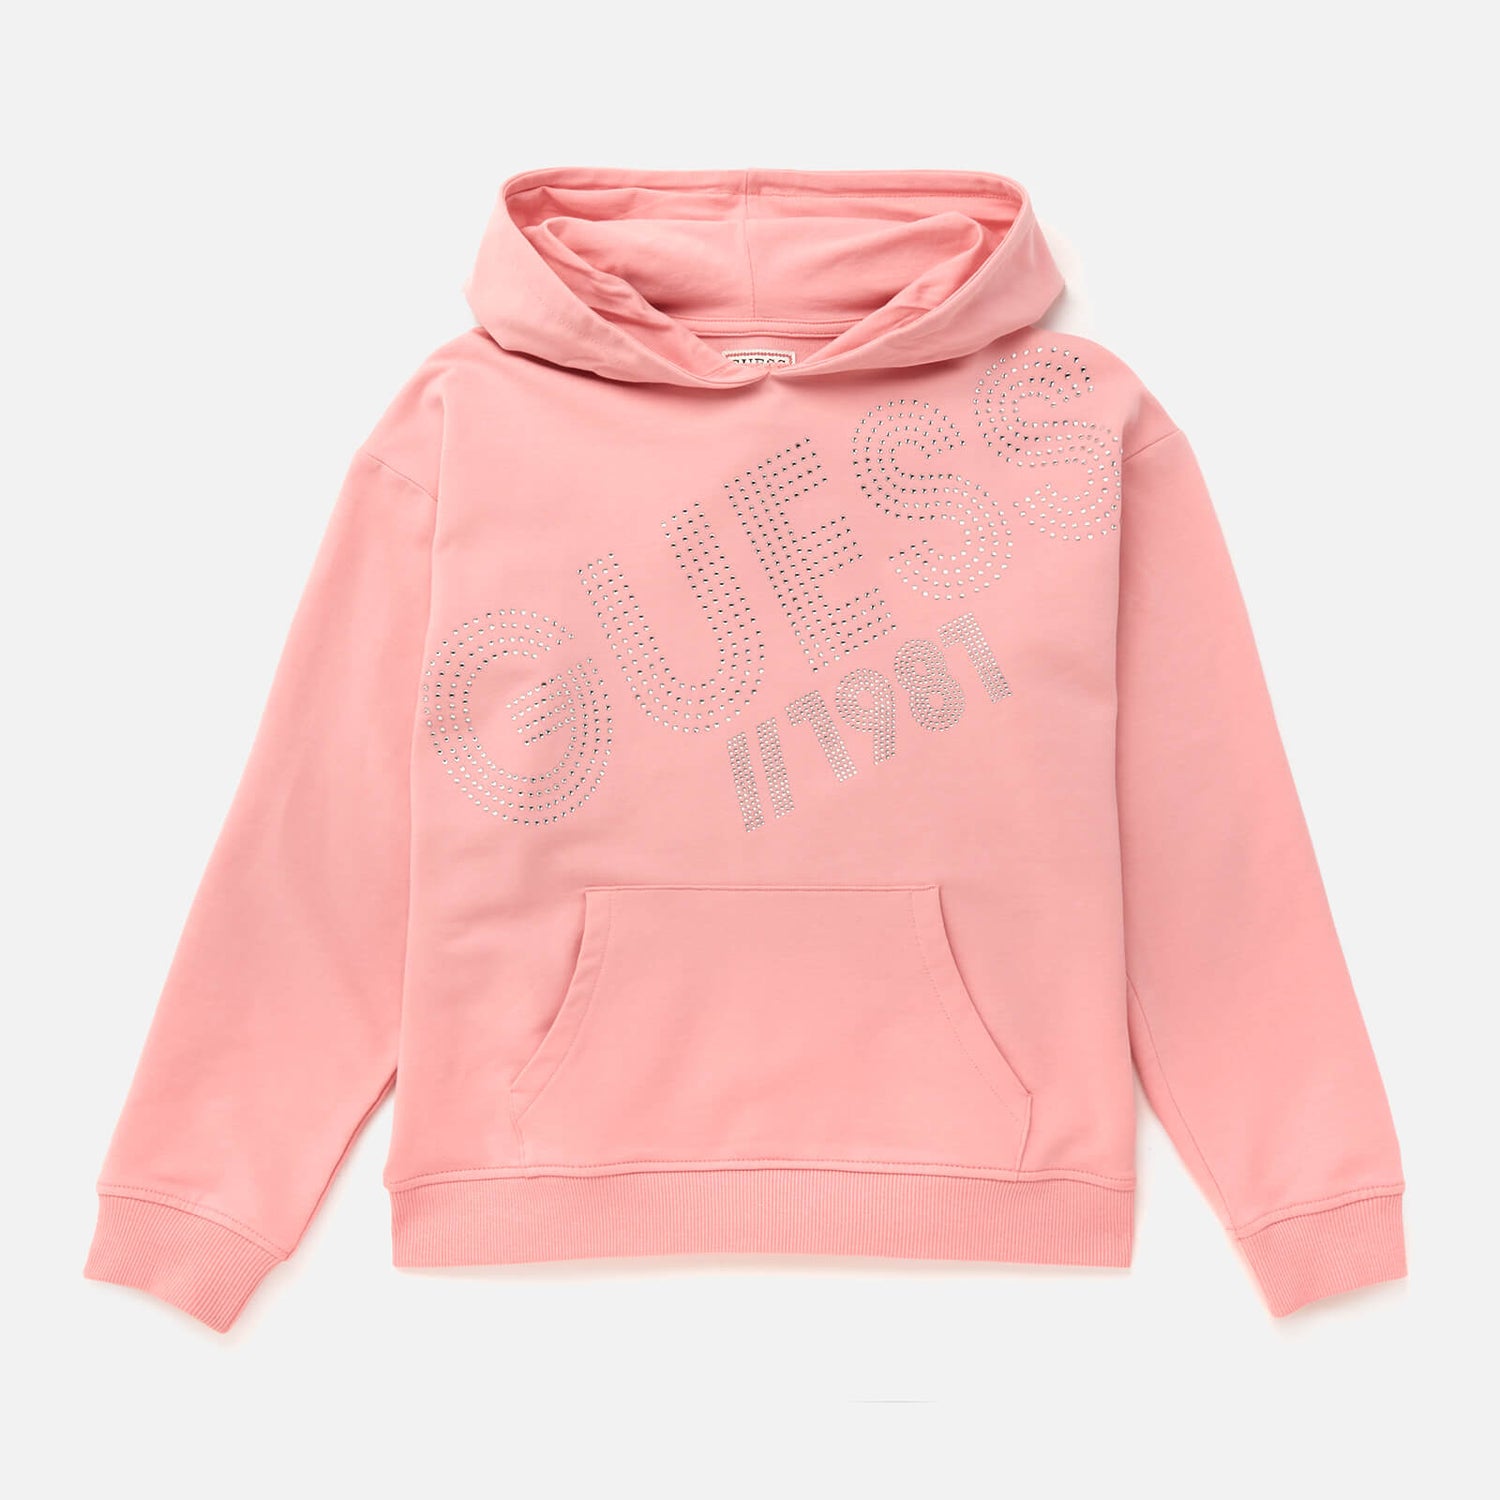 Guess Girls' Hooded Logo Active Top - Pop Gum Pink - 6 Years